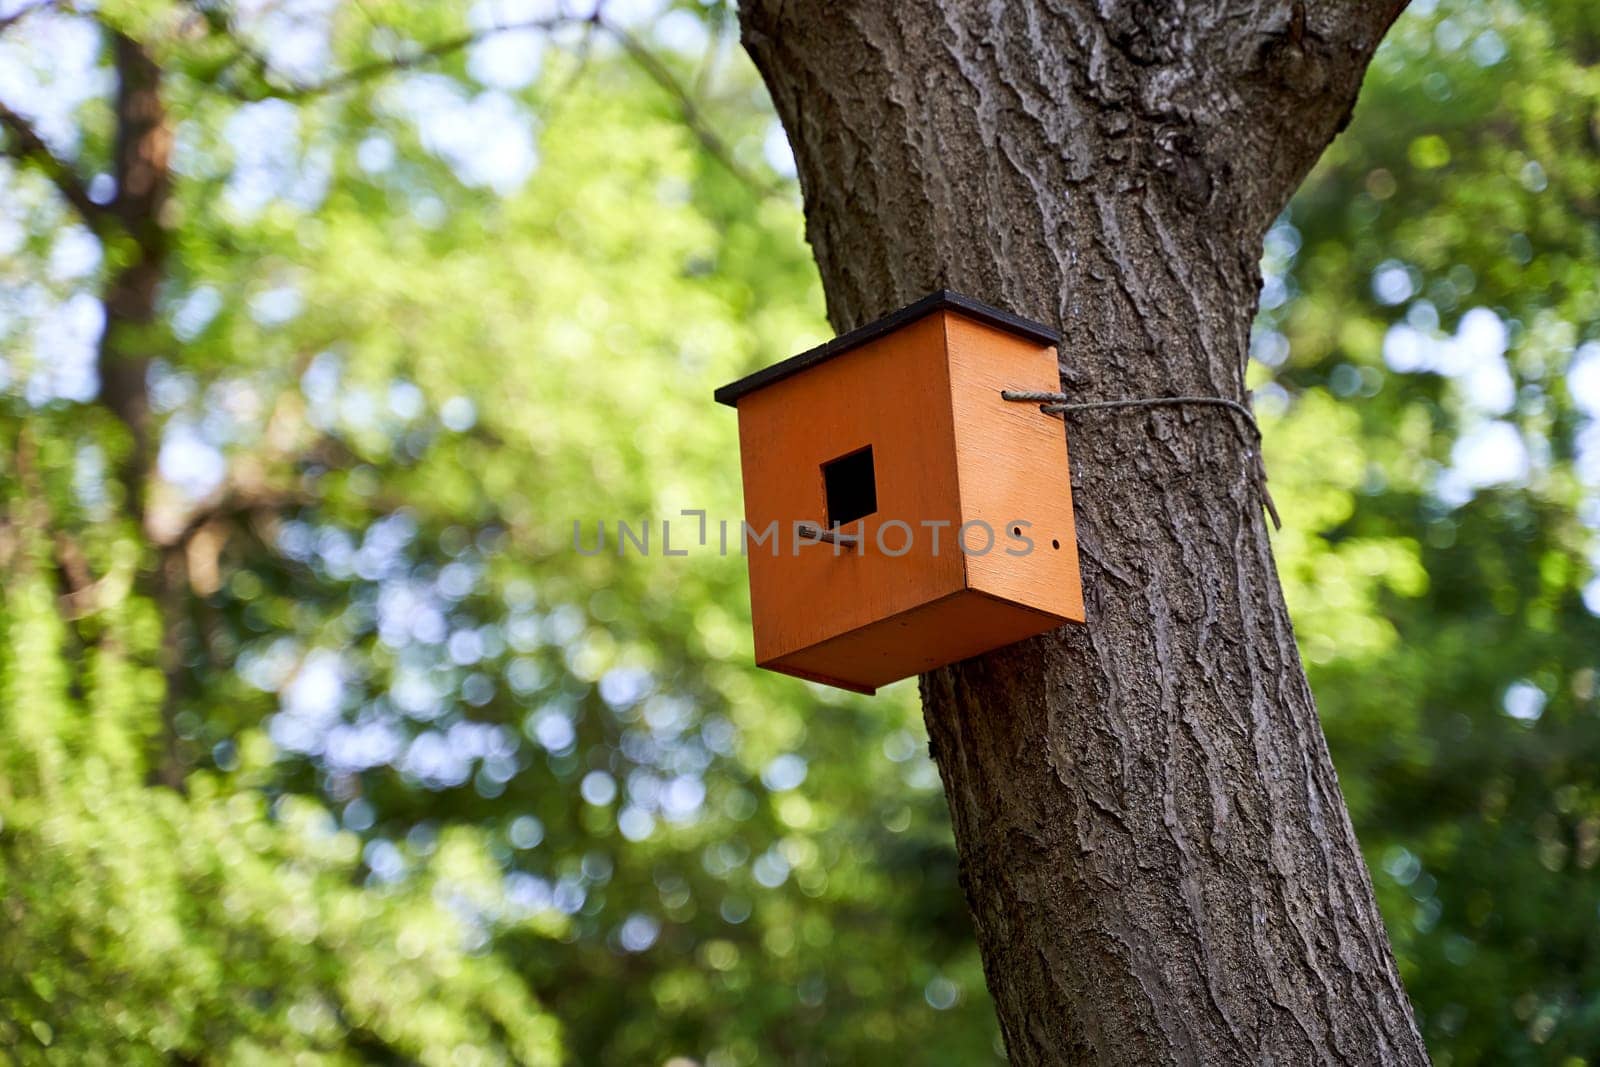 Wooden birdhouse on a tree in a park